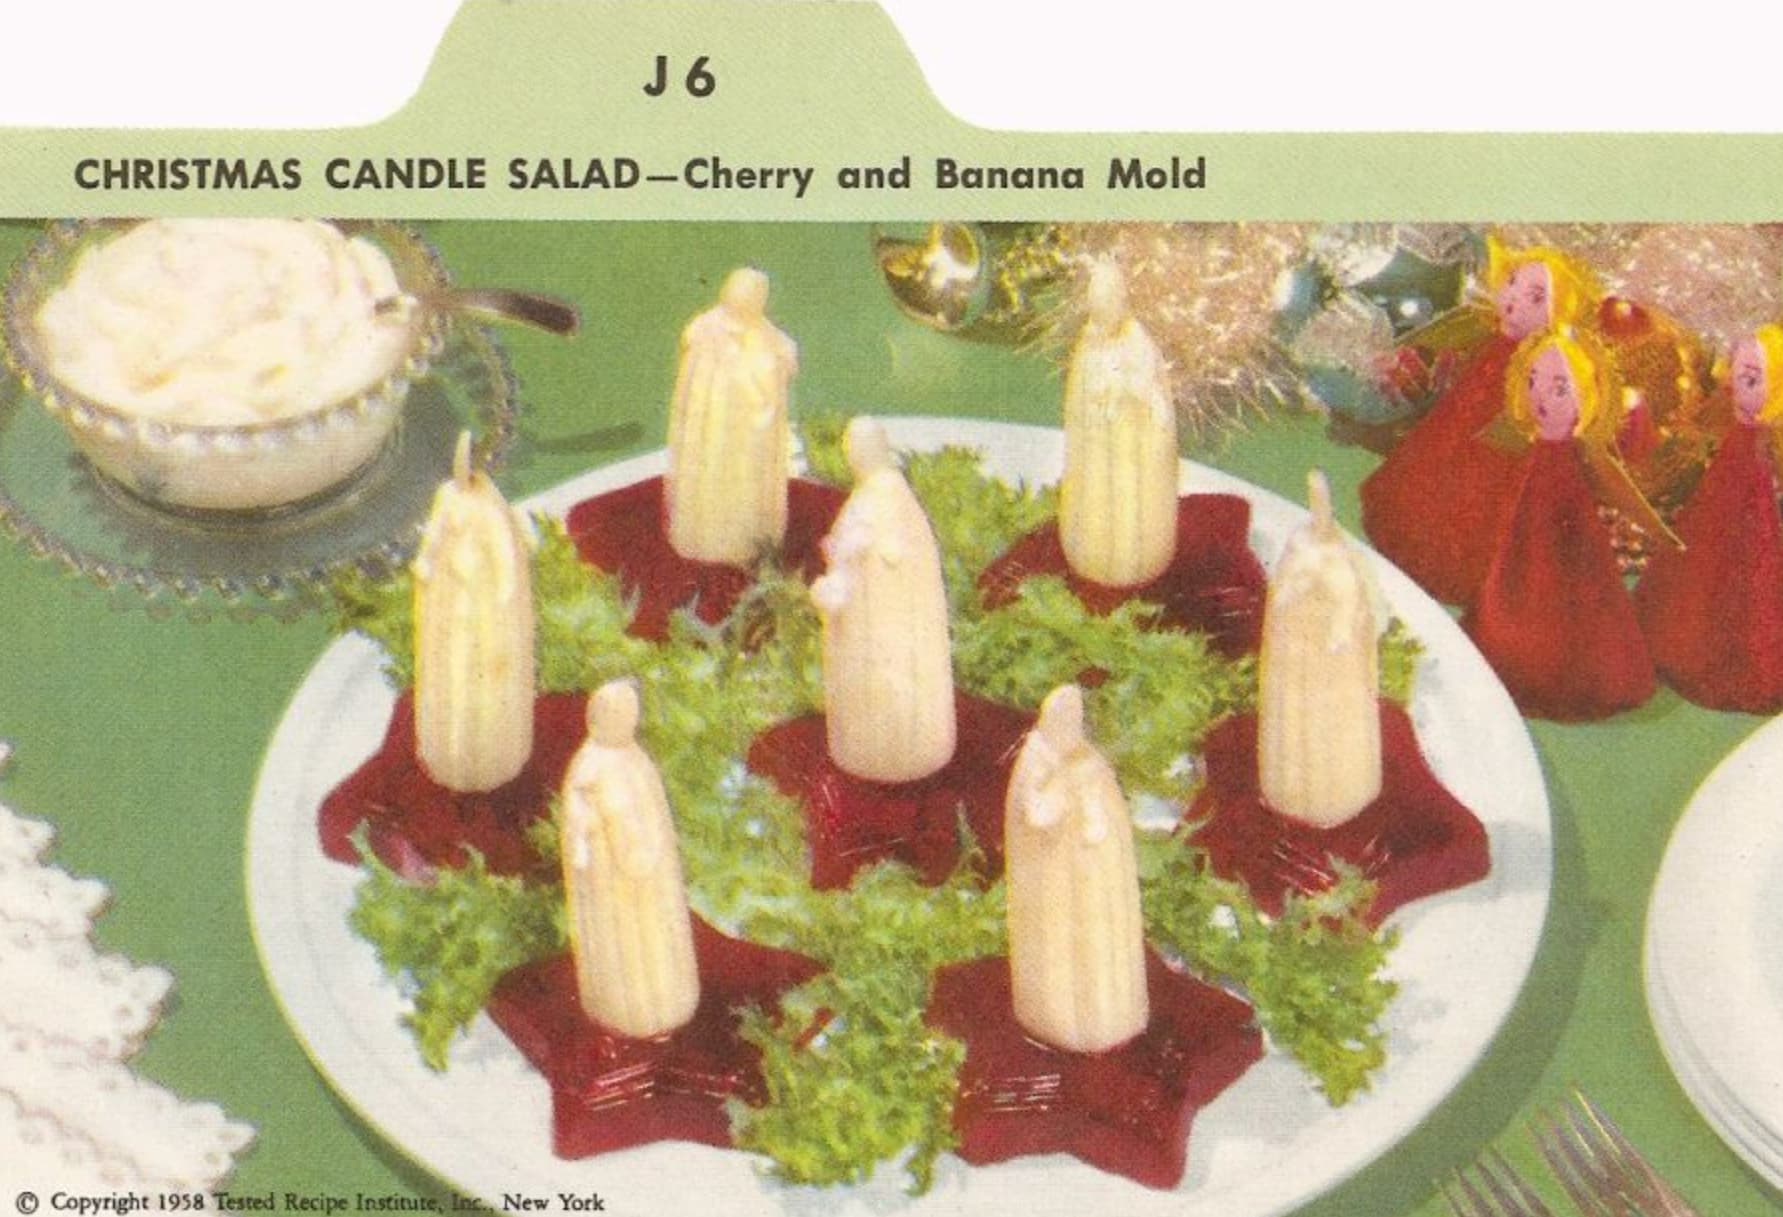 betty crocker candle salad - J6 Christmas Candle SaladCherry and Banana Mold Copyright 1958 Tested Recipe Institute, Inc., New York